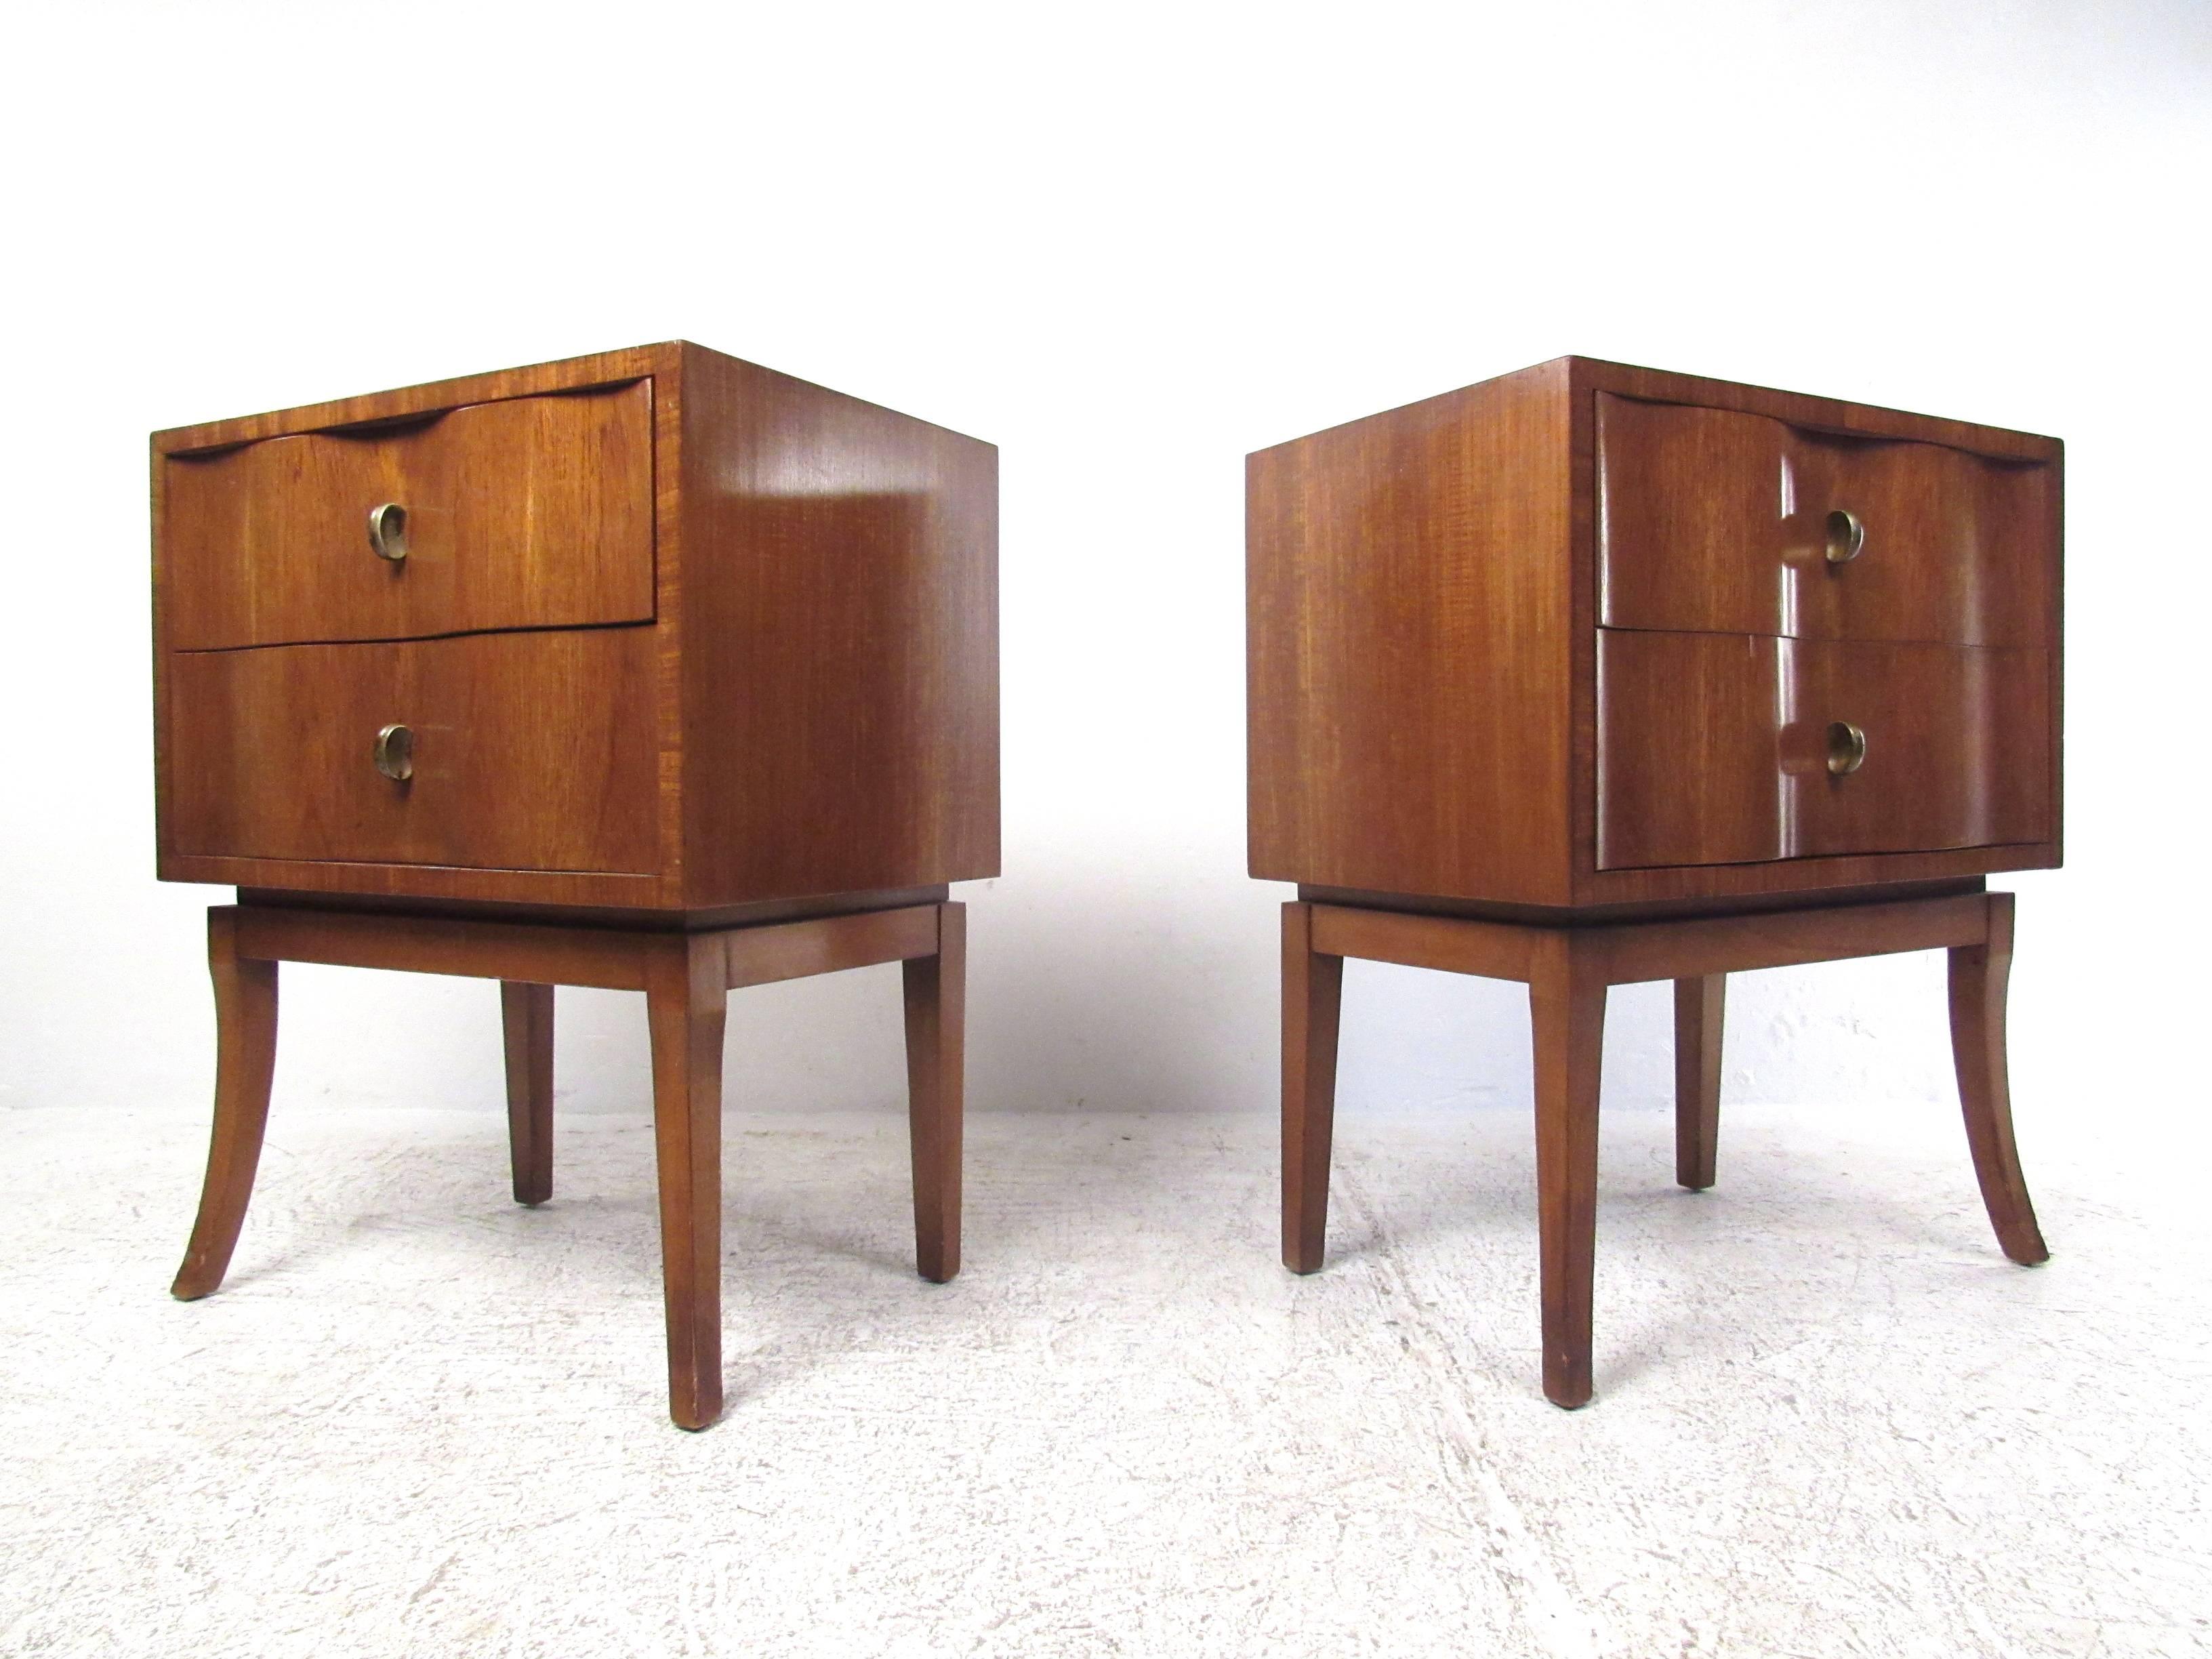 The unique sculptural design of this matching Mid-Century pair features uniquely sculpted drawer fronts, extra tall angles legs, and unique brass pulls. Wonderful pair of nightstands, or an exquisite set of occasional Art Deco style side tables for